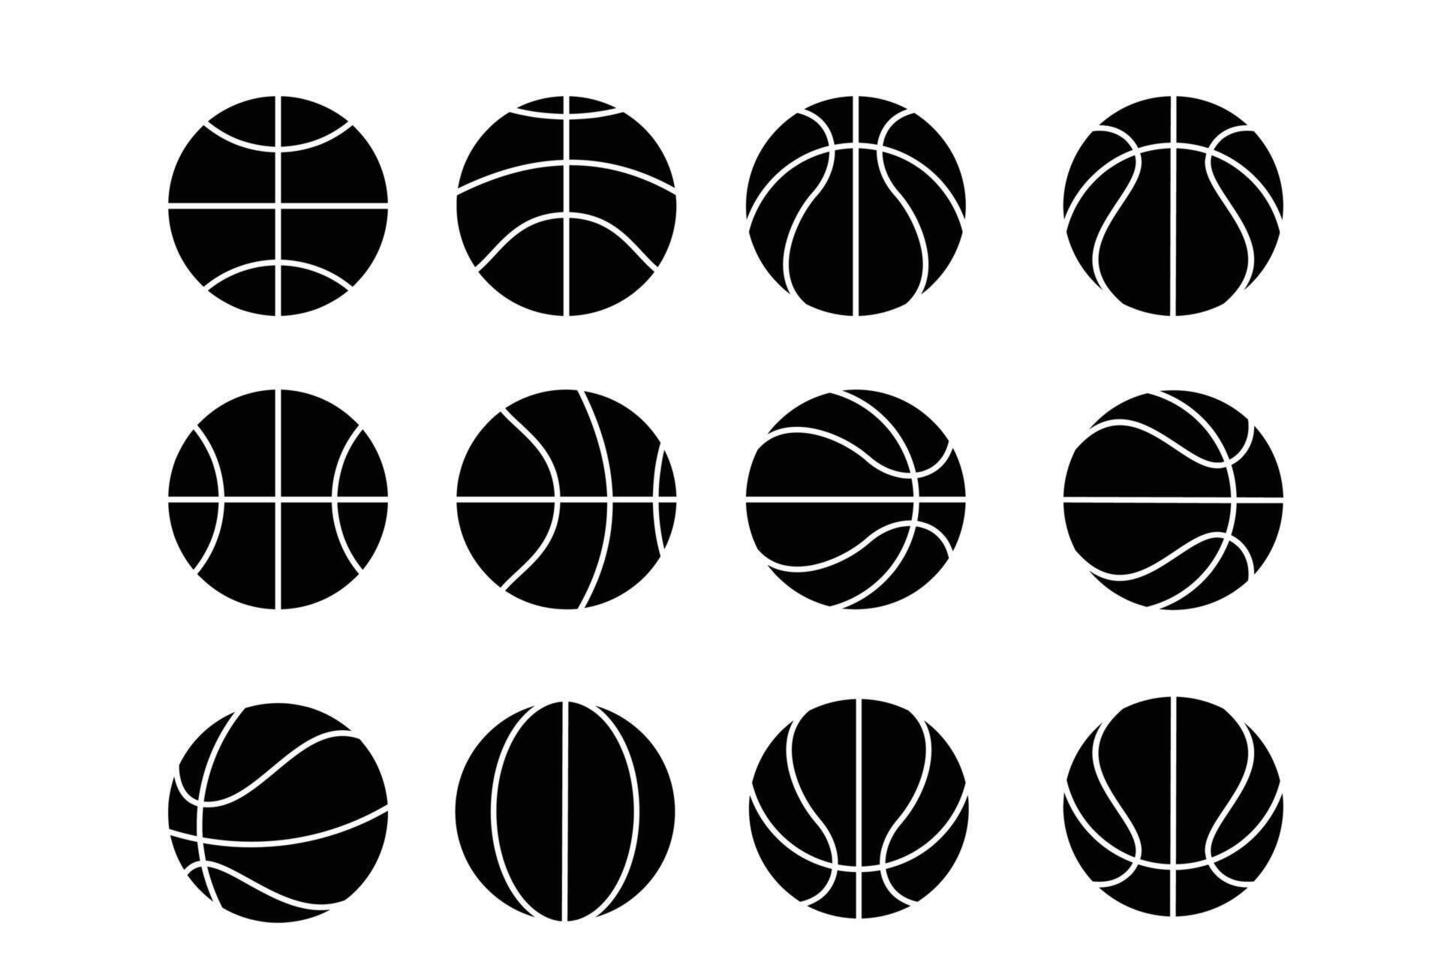 Set of basketball balls. Vector illustration isolated on a white background.